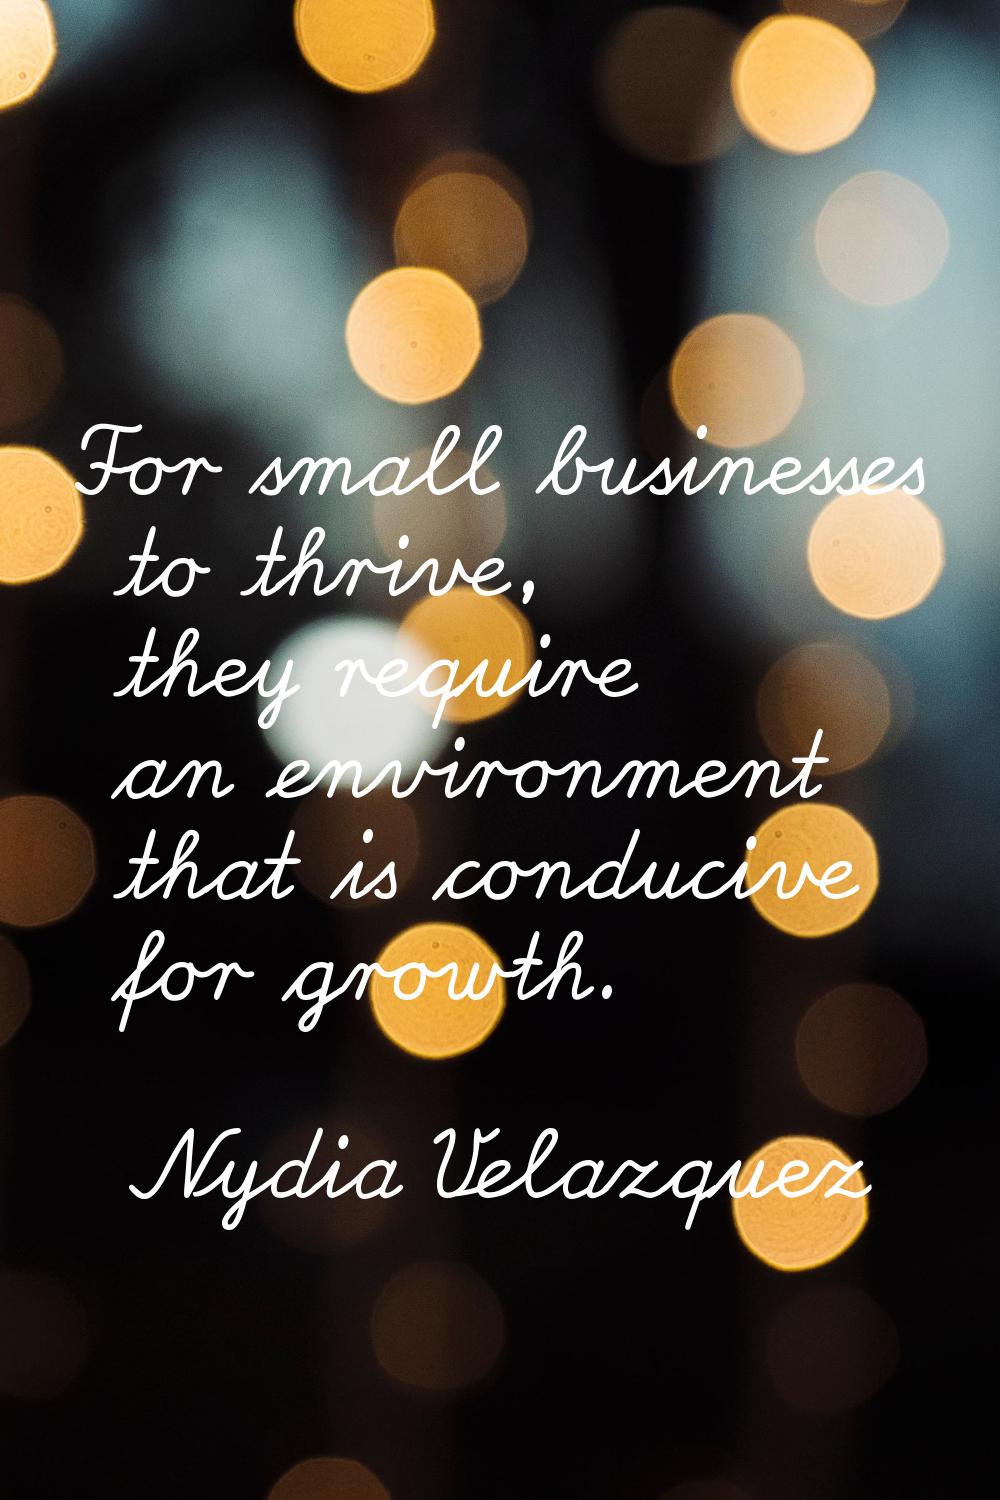 For small businesses to thrive, they require an environment that is conducive for growth.